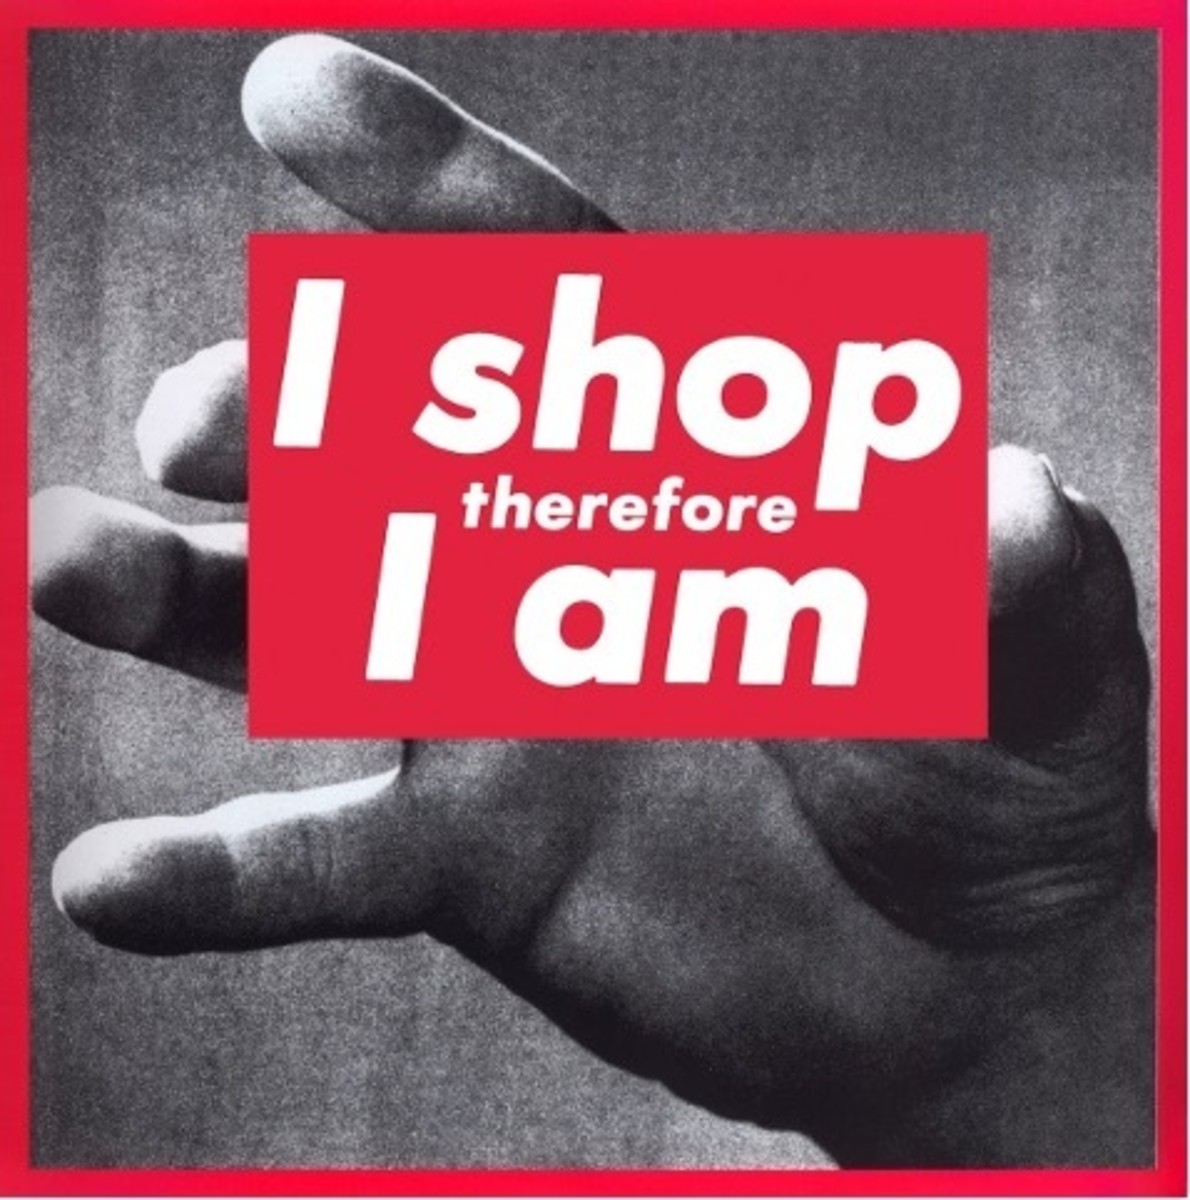 Barbara Kruger in Relation to Ideology and Consumerism